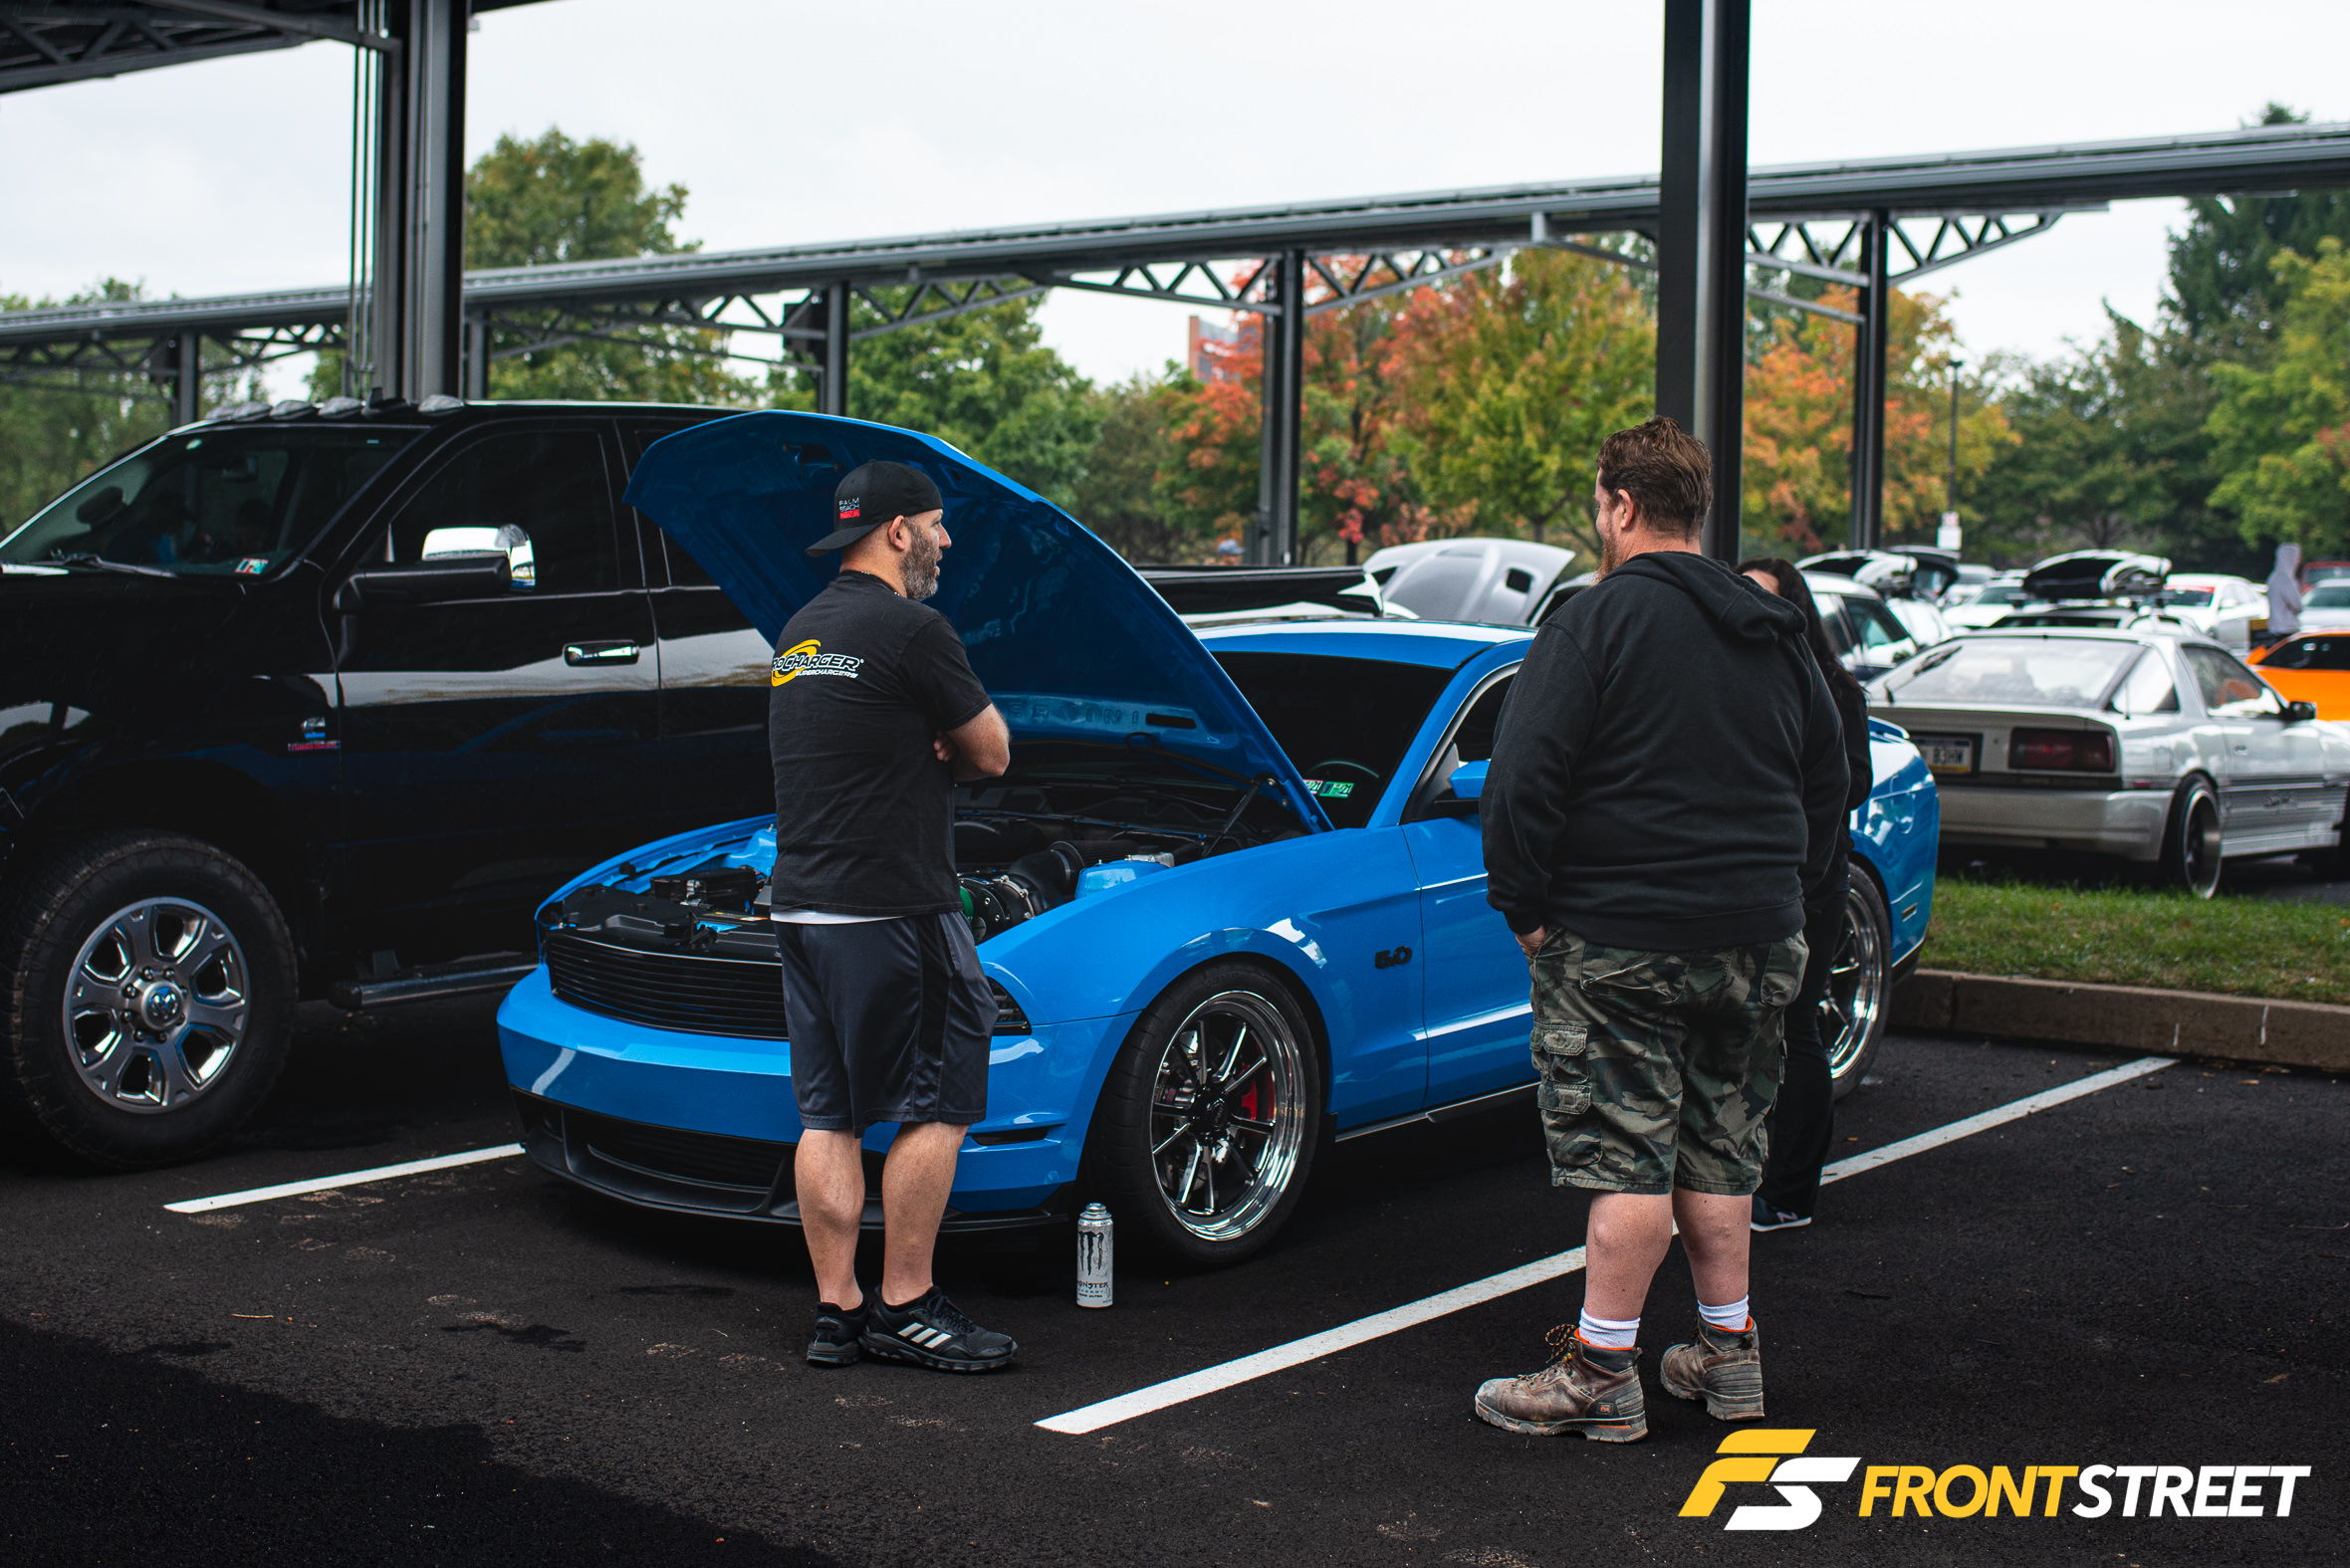 Front Street Media Cars & Coffee Presented by Whiteline - September